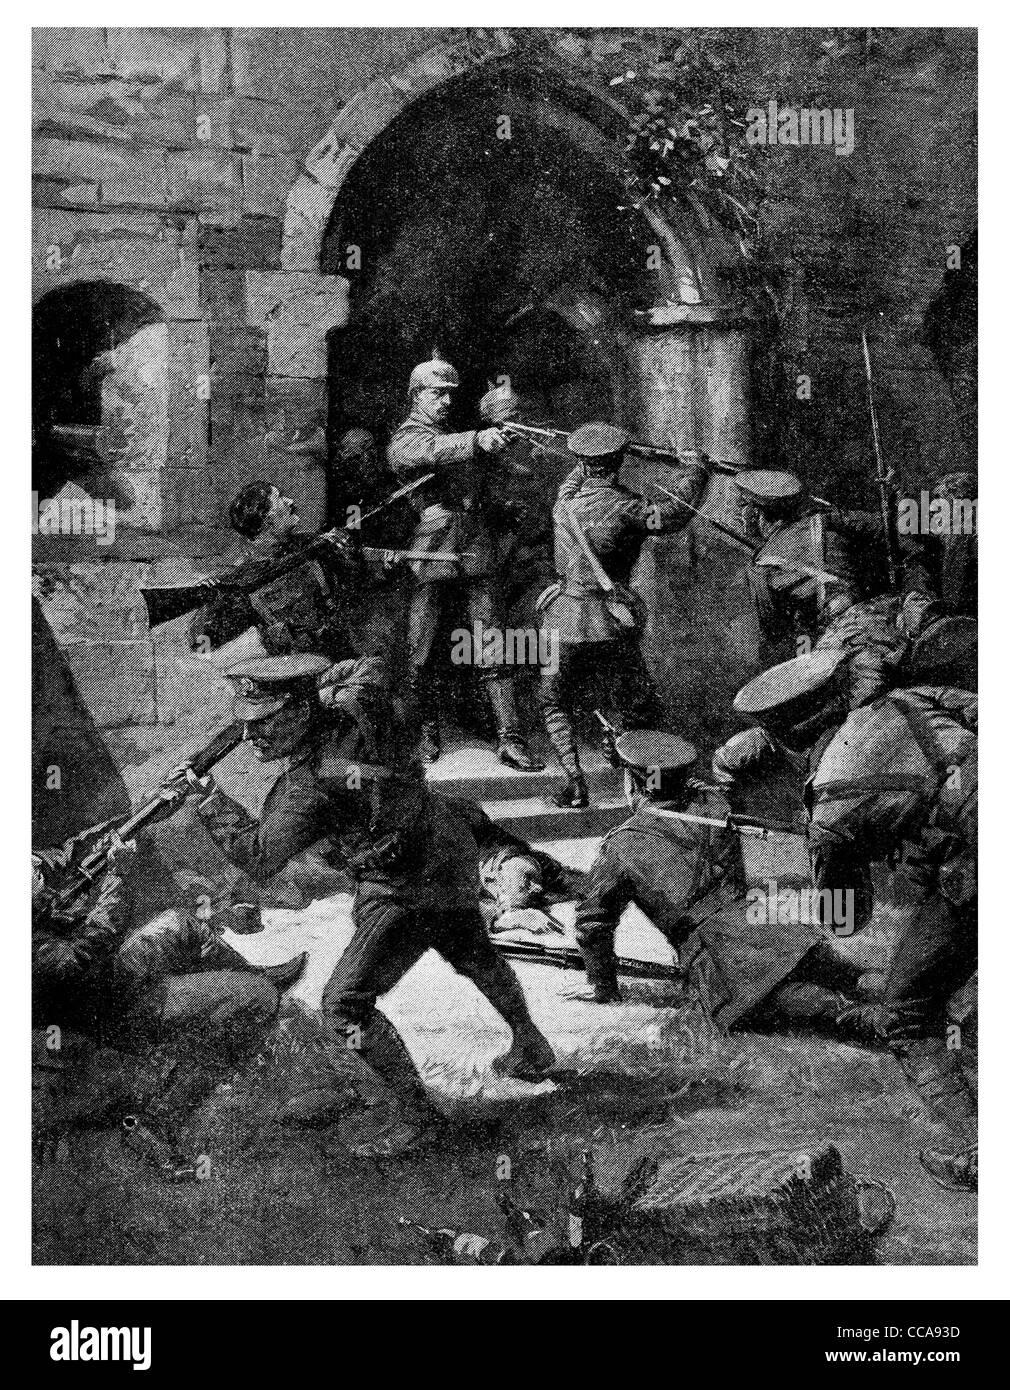 1915 British capture Château d'Ouge rifle Bayonet point church yard hand combat stabbing stabbed mortally wounded pistol Stock Photo